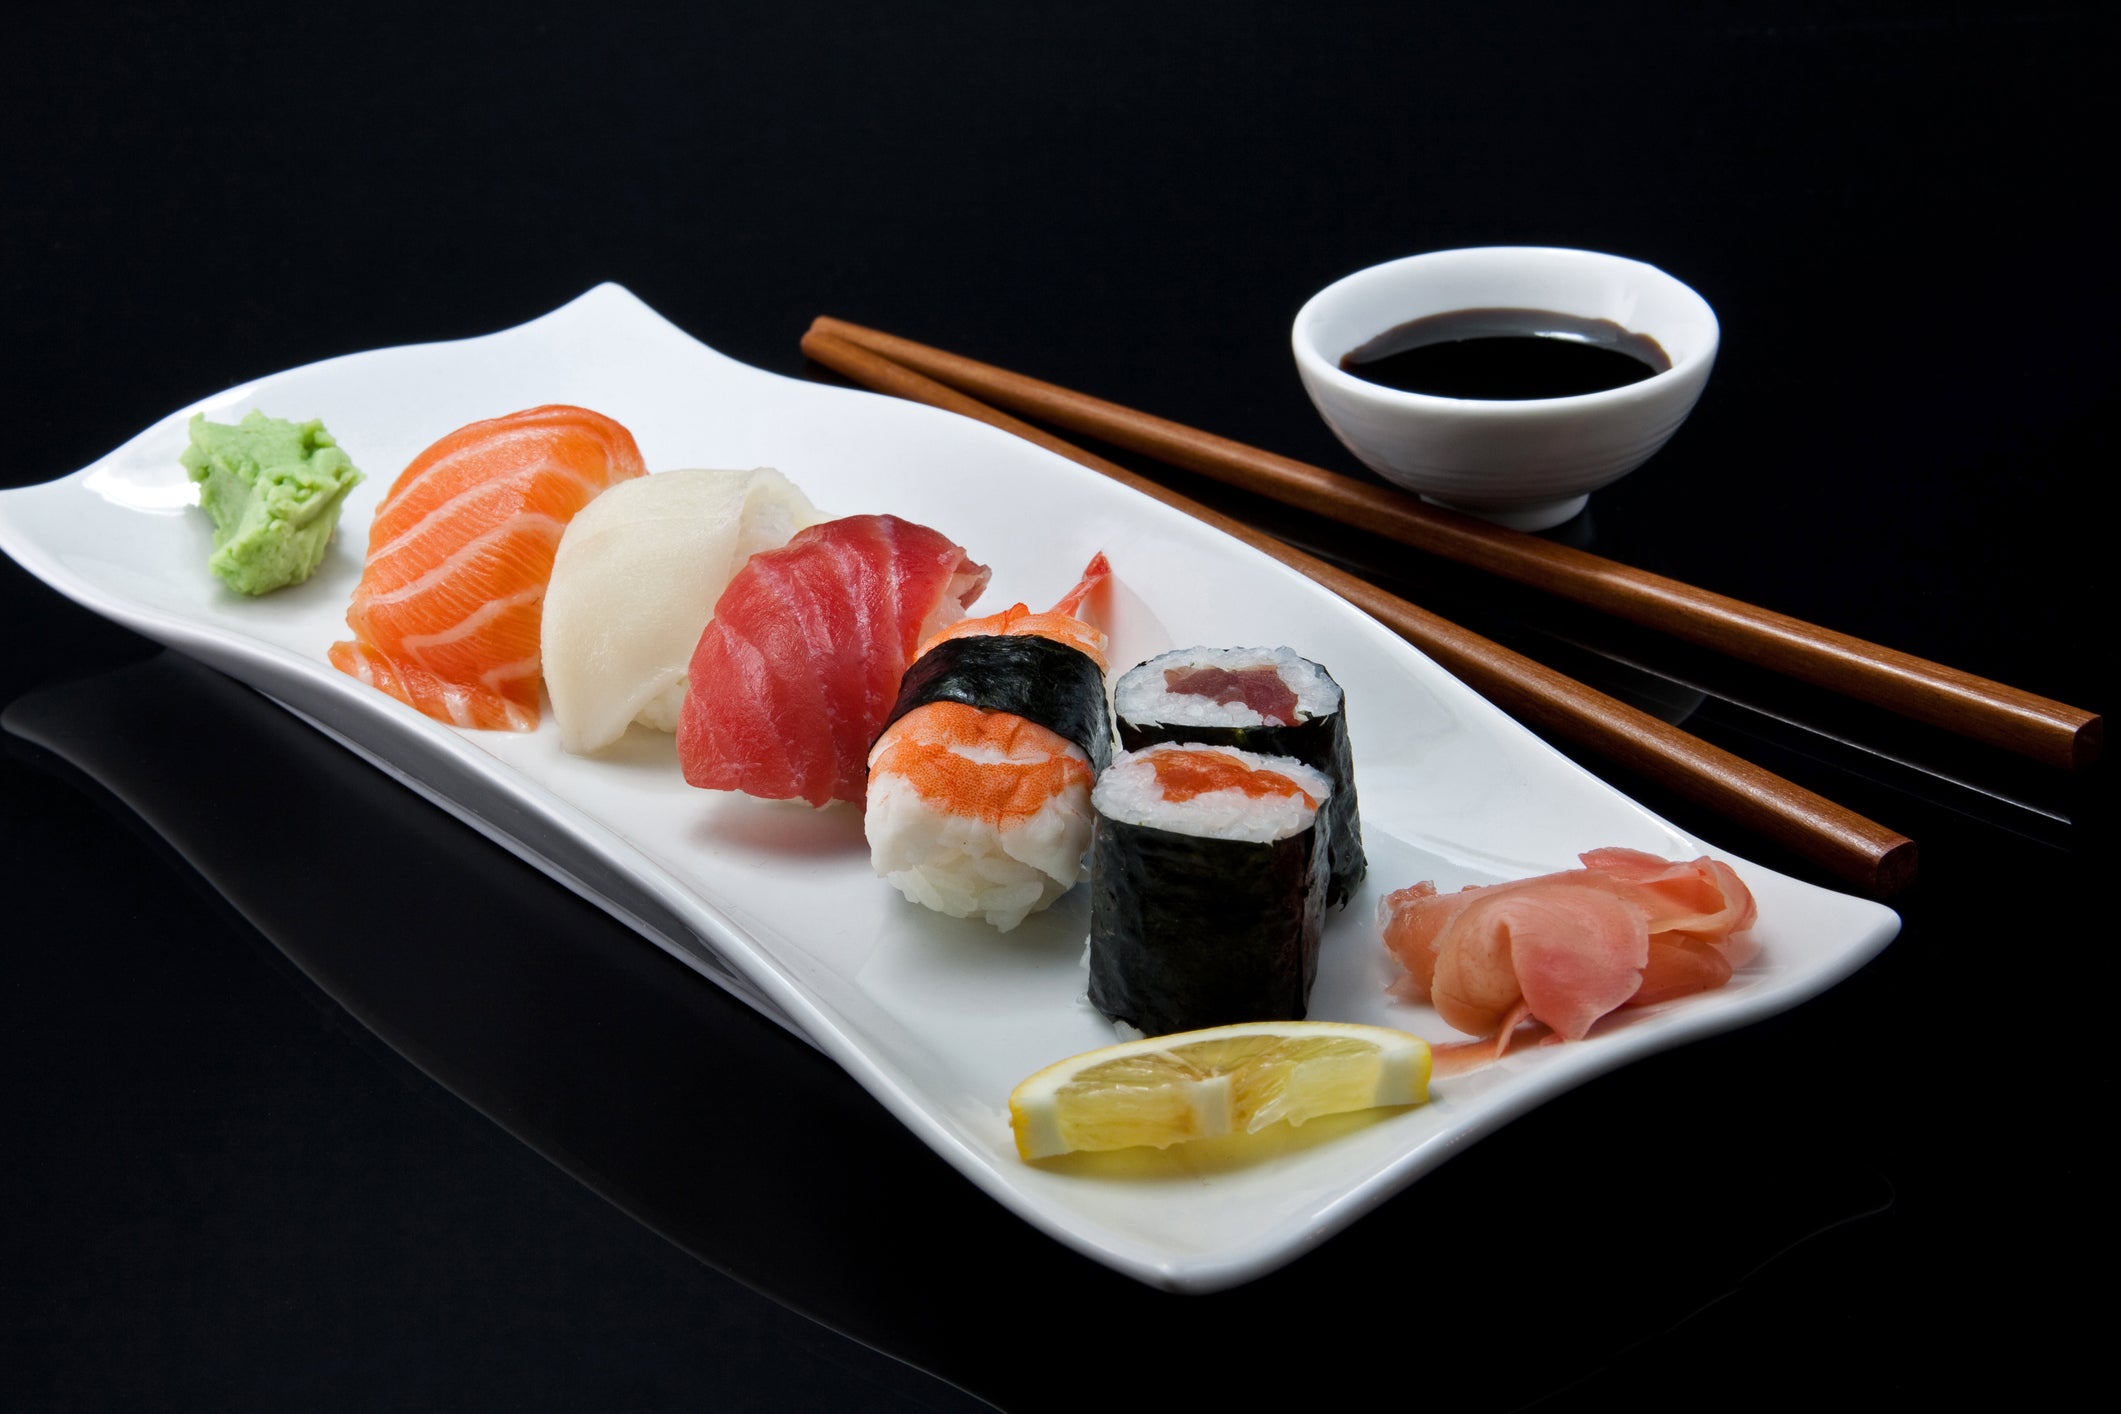 What type of fish is commonly used for making nigiri?